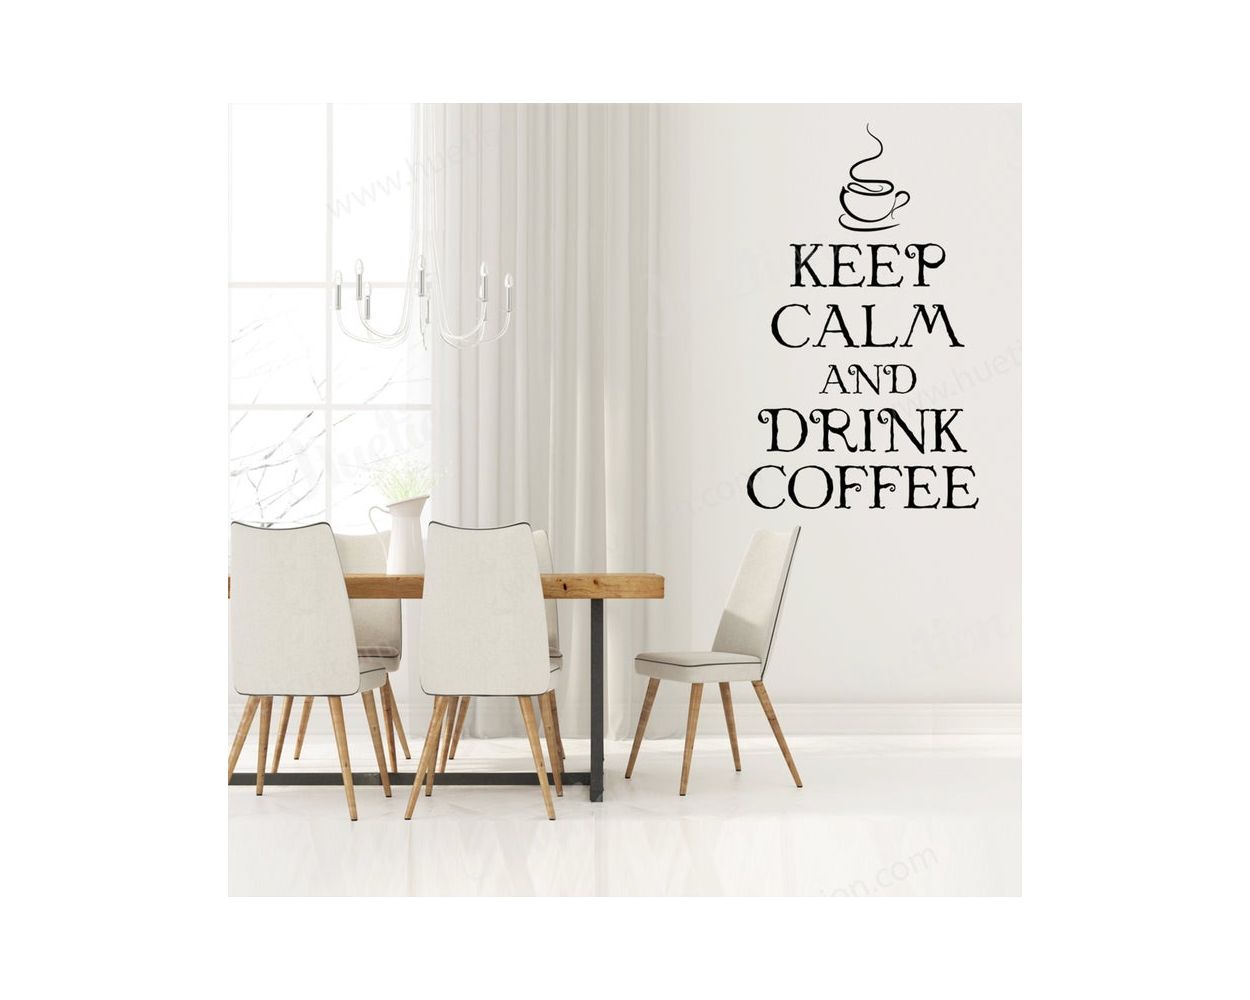 Keep Calm and Drink Coffee Decals for Kitchen Wall Decor